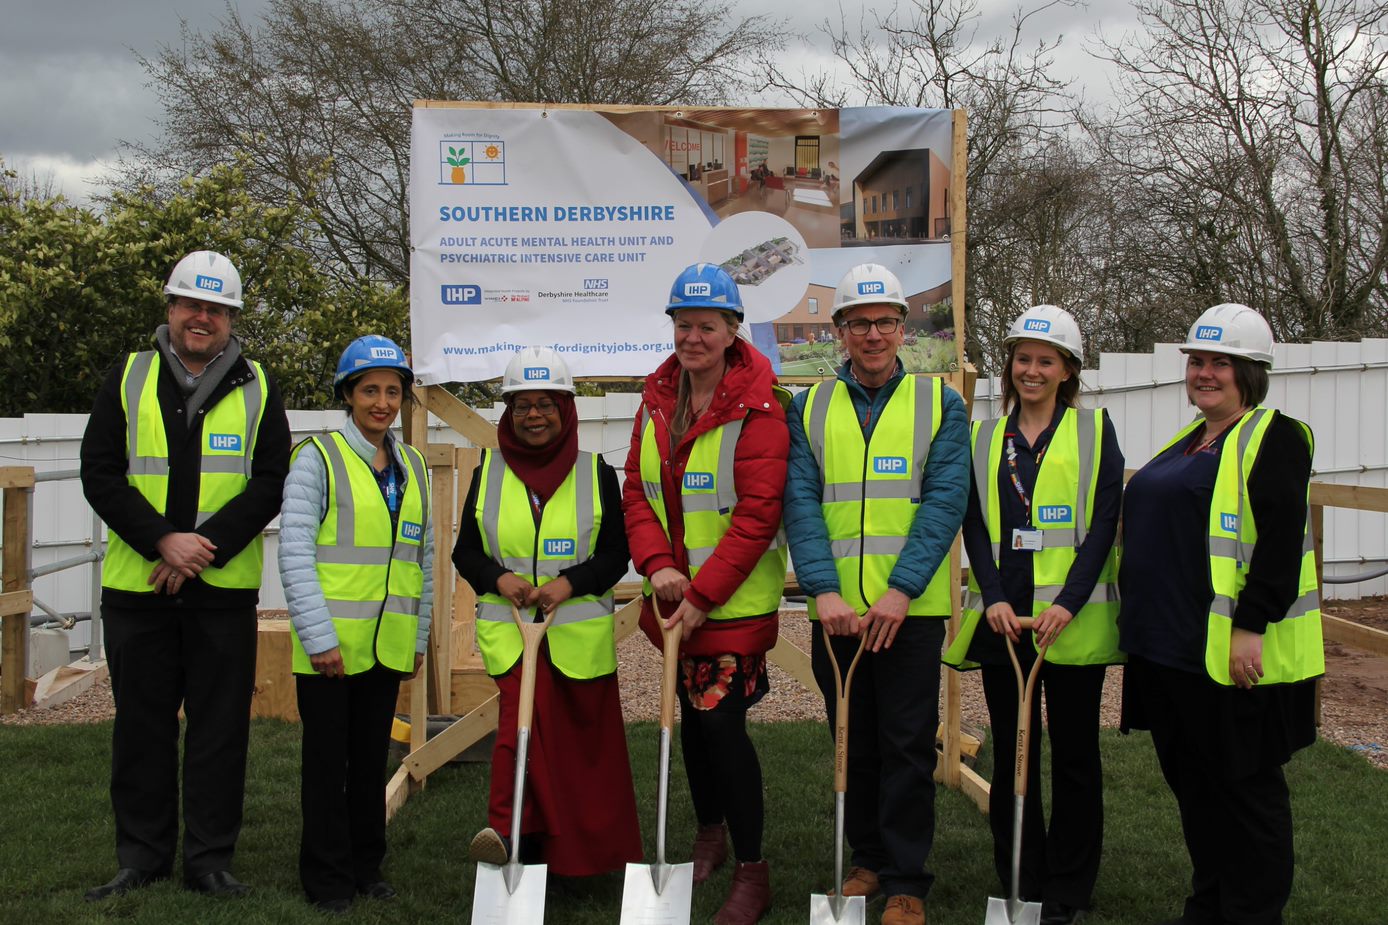 Derbyshire Healthcare's ground-breaking ceremonies mark first day of construction for new mental health facilities